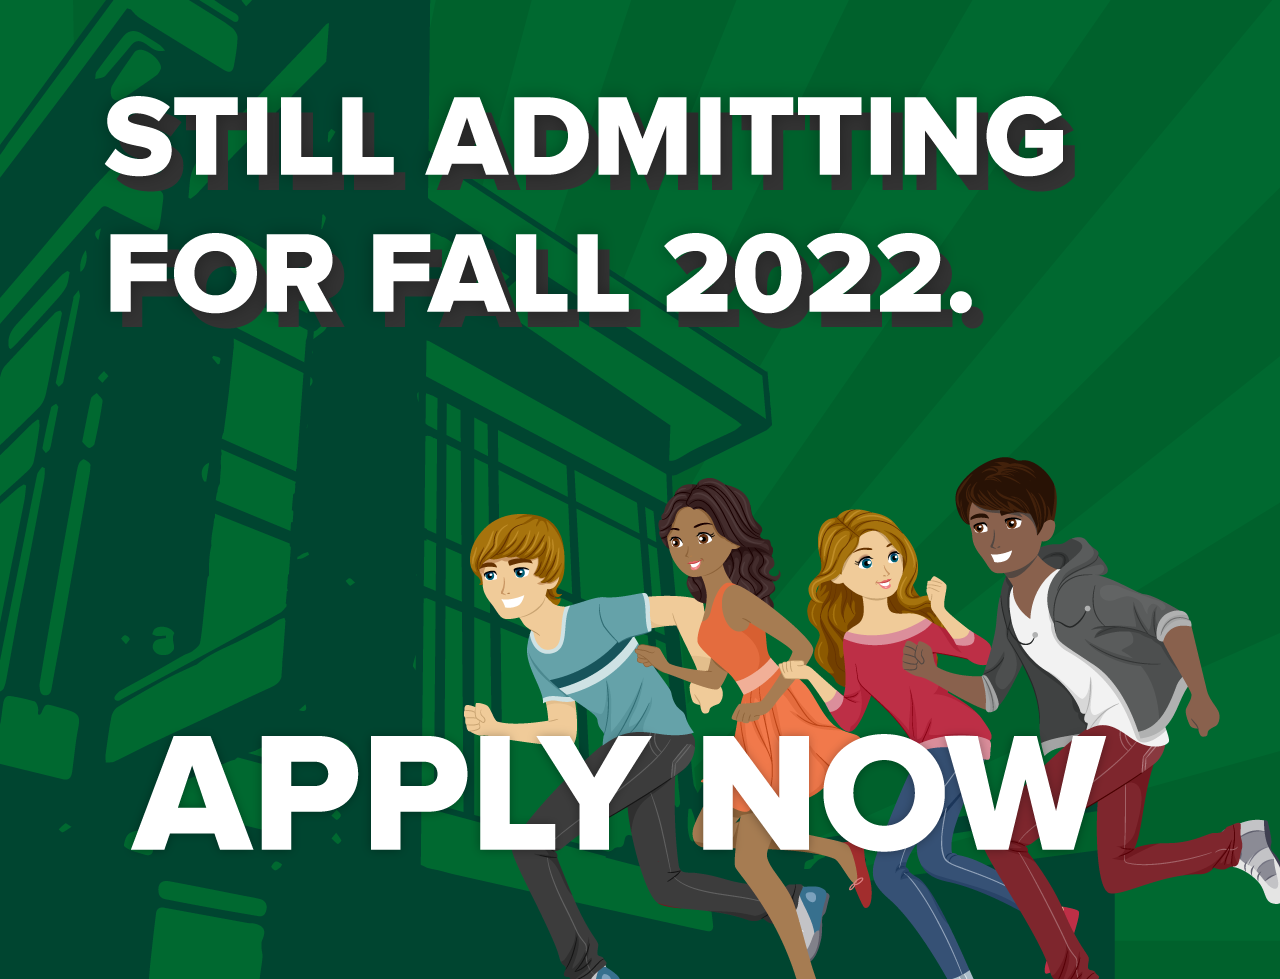 Still admitting for Fall 2022. Apply now